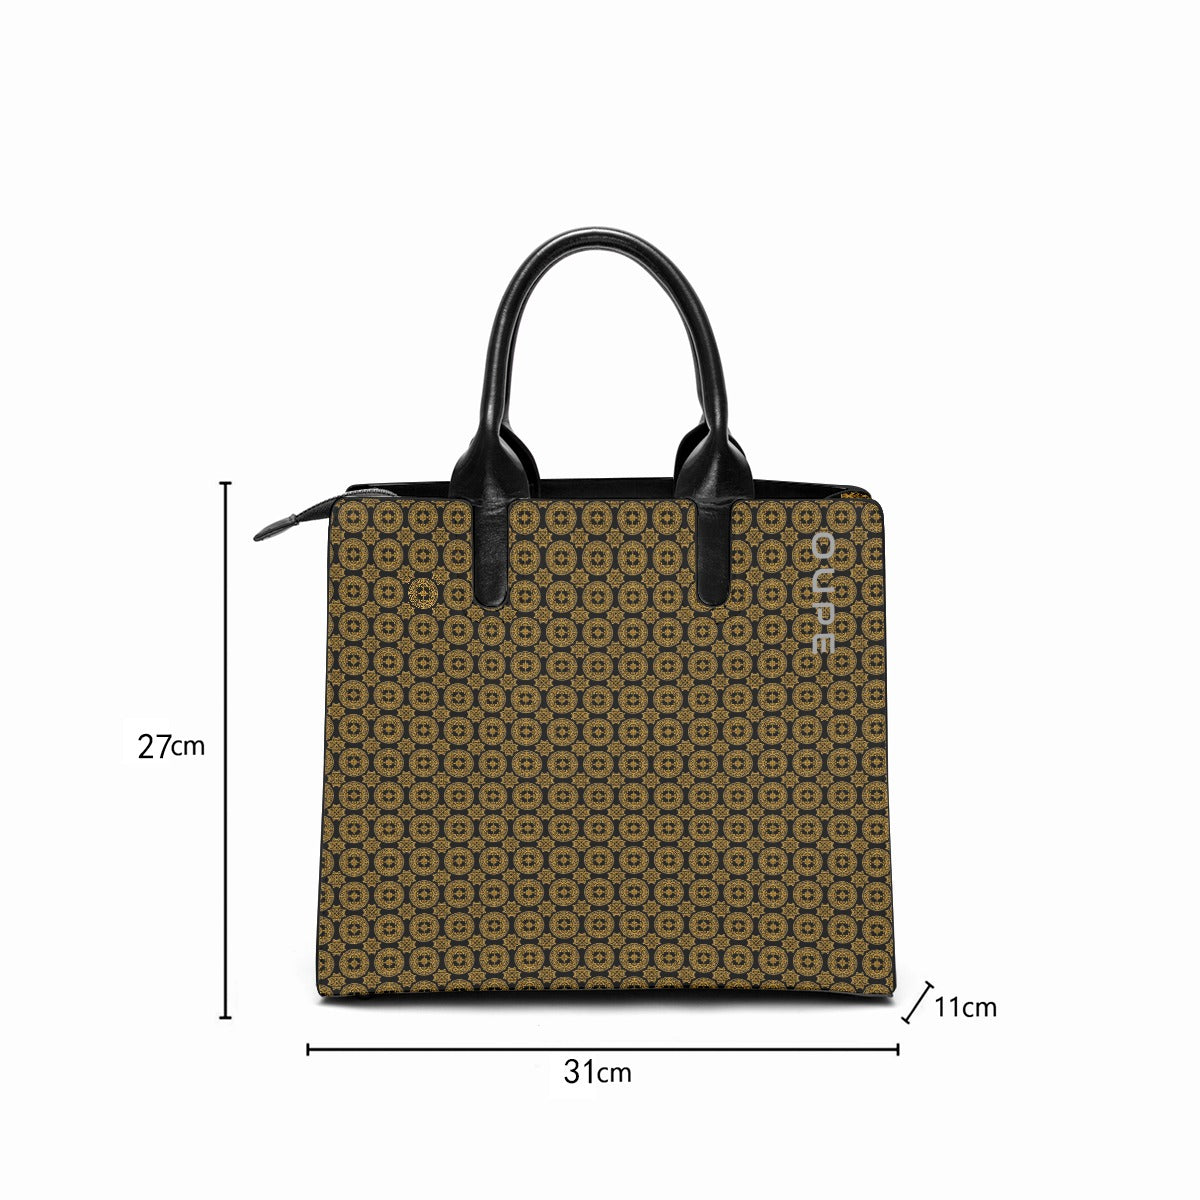 OUPE AC BAROQUE "PALACE" TOTE